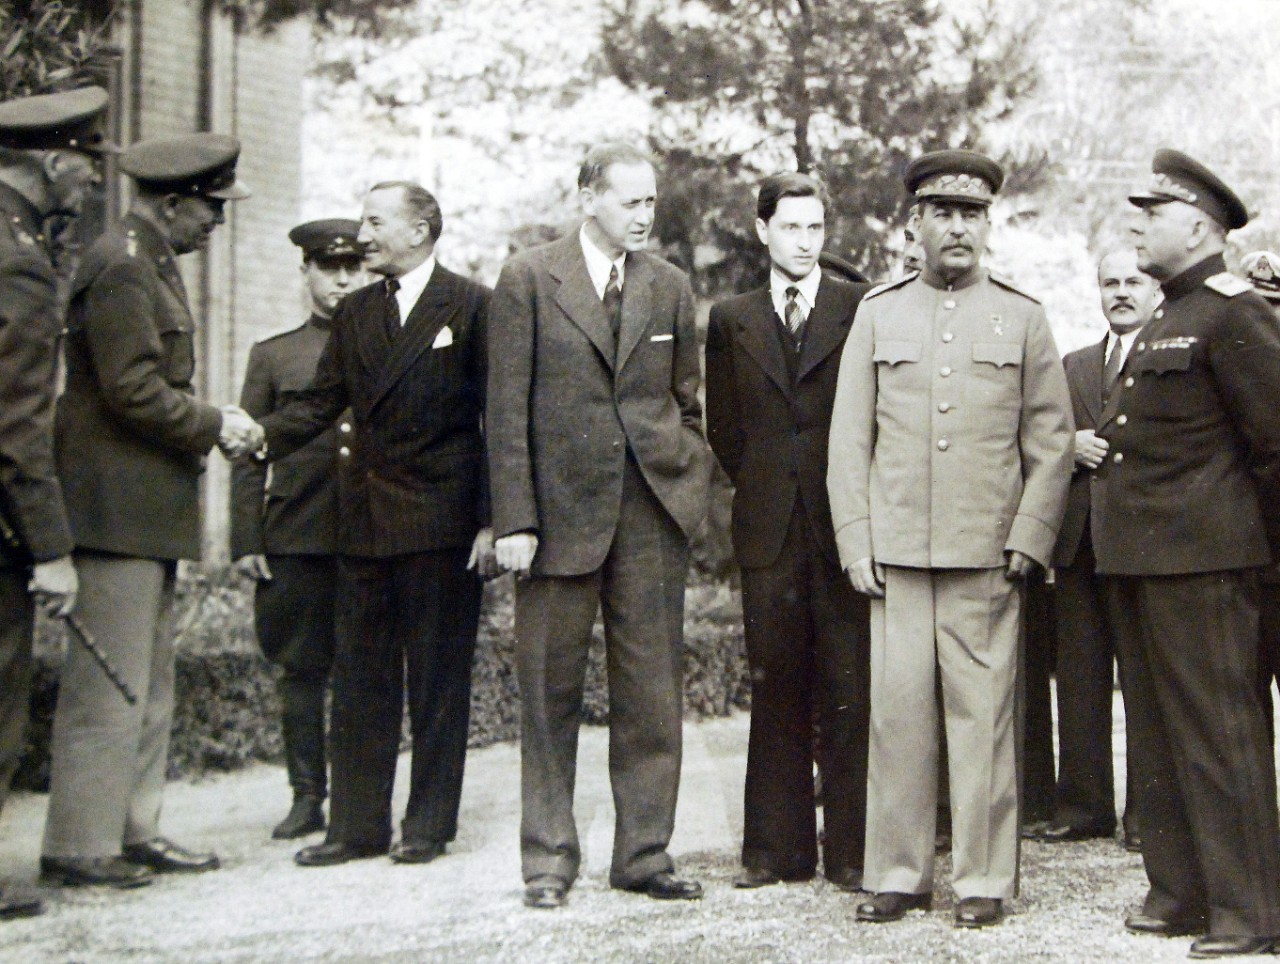 Lot 11597-7:  Tehran Conference, November-December 1943.  Standing outside the Russian Embassy, left to right:  Unidentified British officer; General George C. Marshall, Chief of Staff, USA, shaking hands with Sir Archibald Clark Keer, British Ambassador to the USSR; Harry Hopkins, Marshal Stalin’s interpreter; Marshal Josef Stalin; Foreign minister Molotov; General Voroshilov.  U.S. Army photograph from the collection of the Office of War Information.   Courtesy of the Library of Congress.   (2016/01/15).